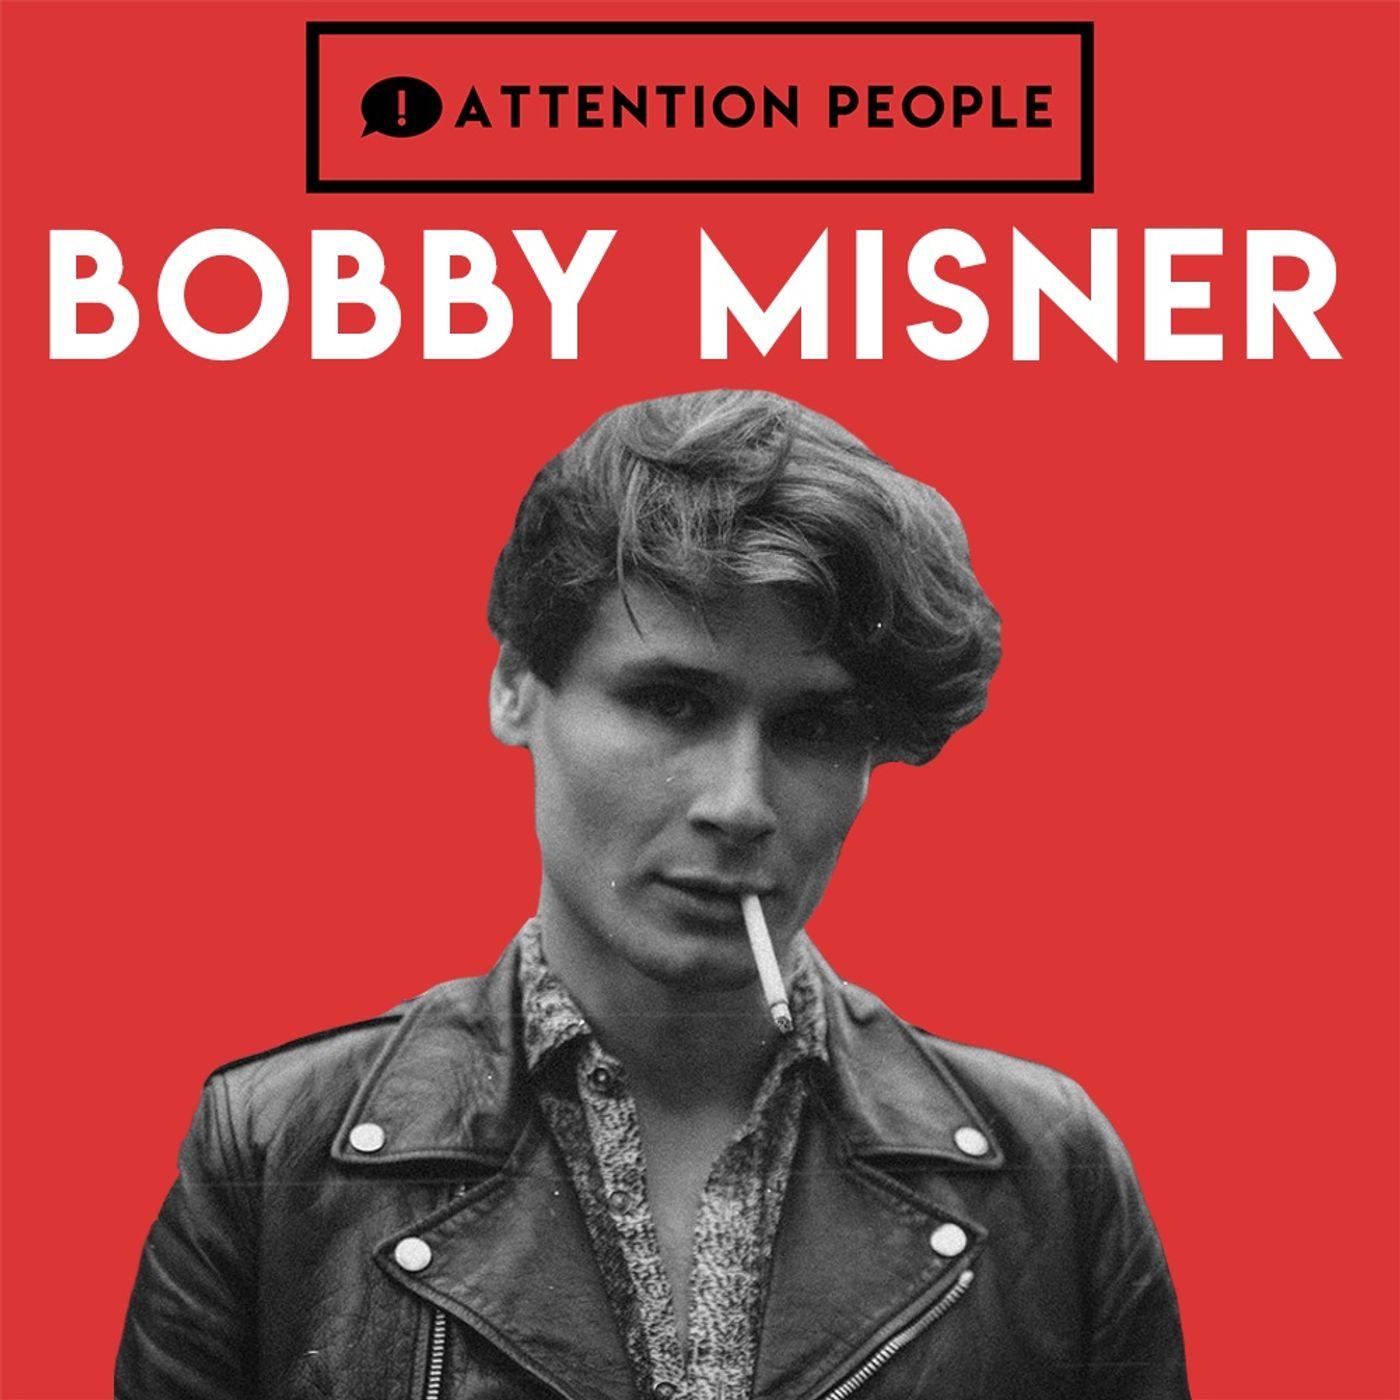 Bobby Misner -140,000 Subscribers With One Video